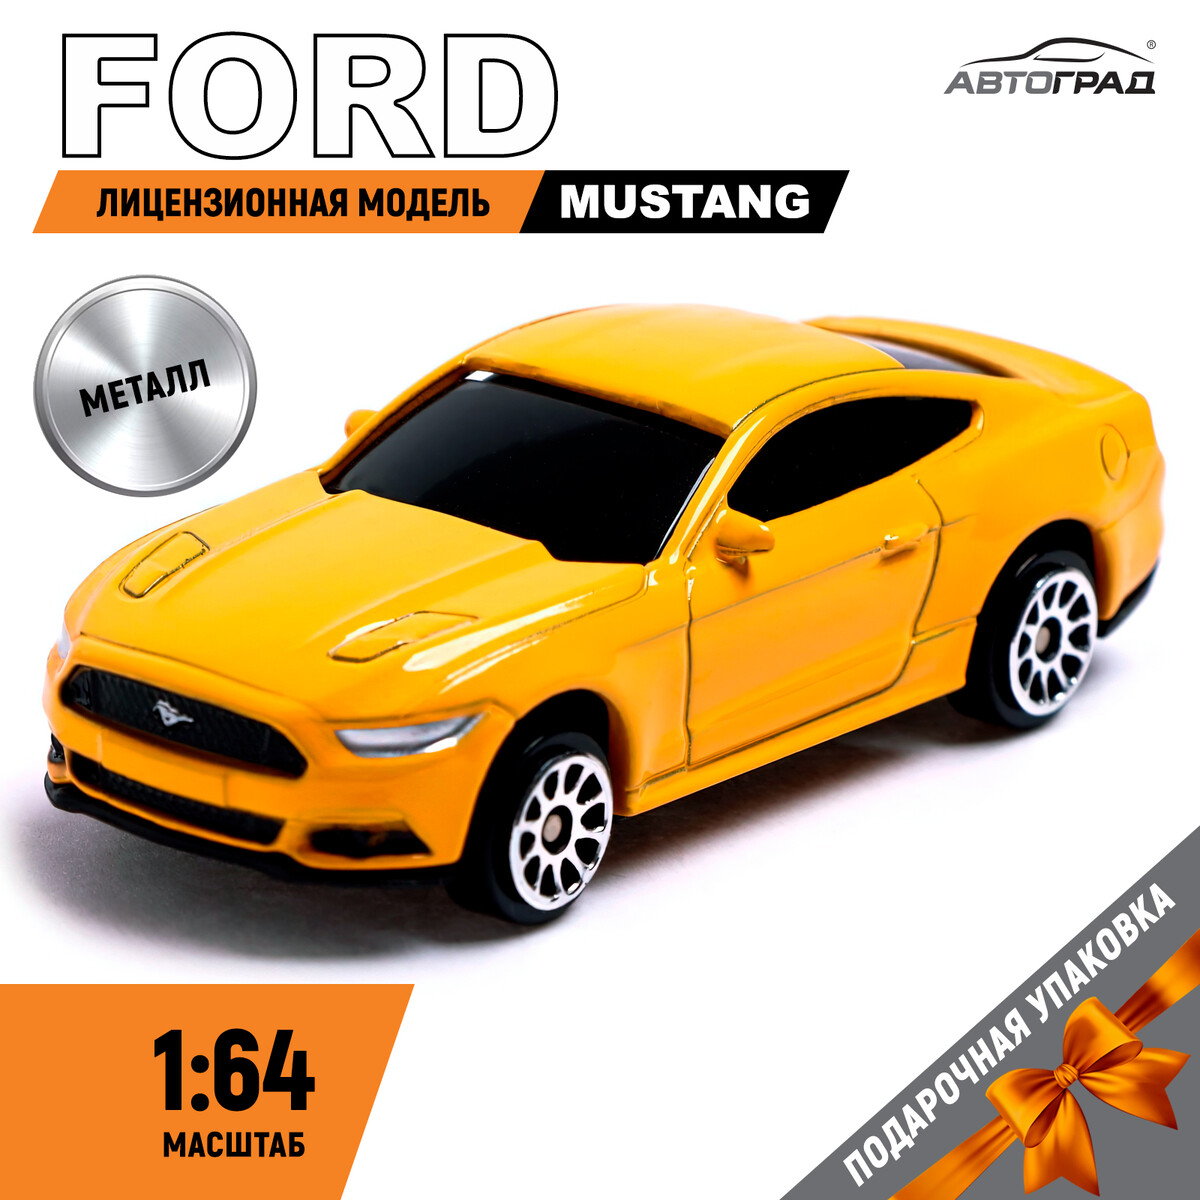 Машина металлическая ford mustang, 1:64, цвет желтый datong world car remote key shell case for ford edge explorer ranger expedition mustang escape taurus mazda tribute key cove